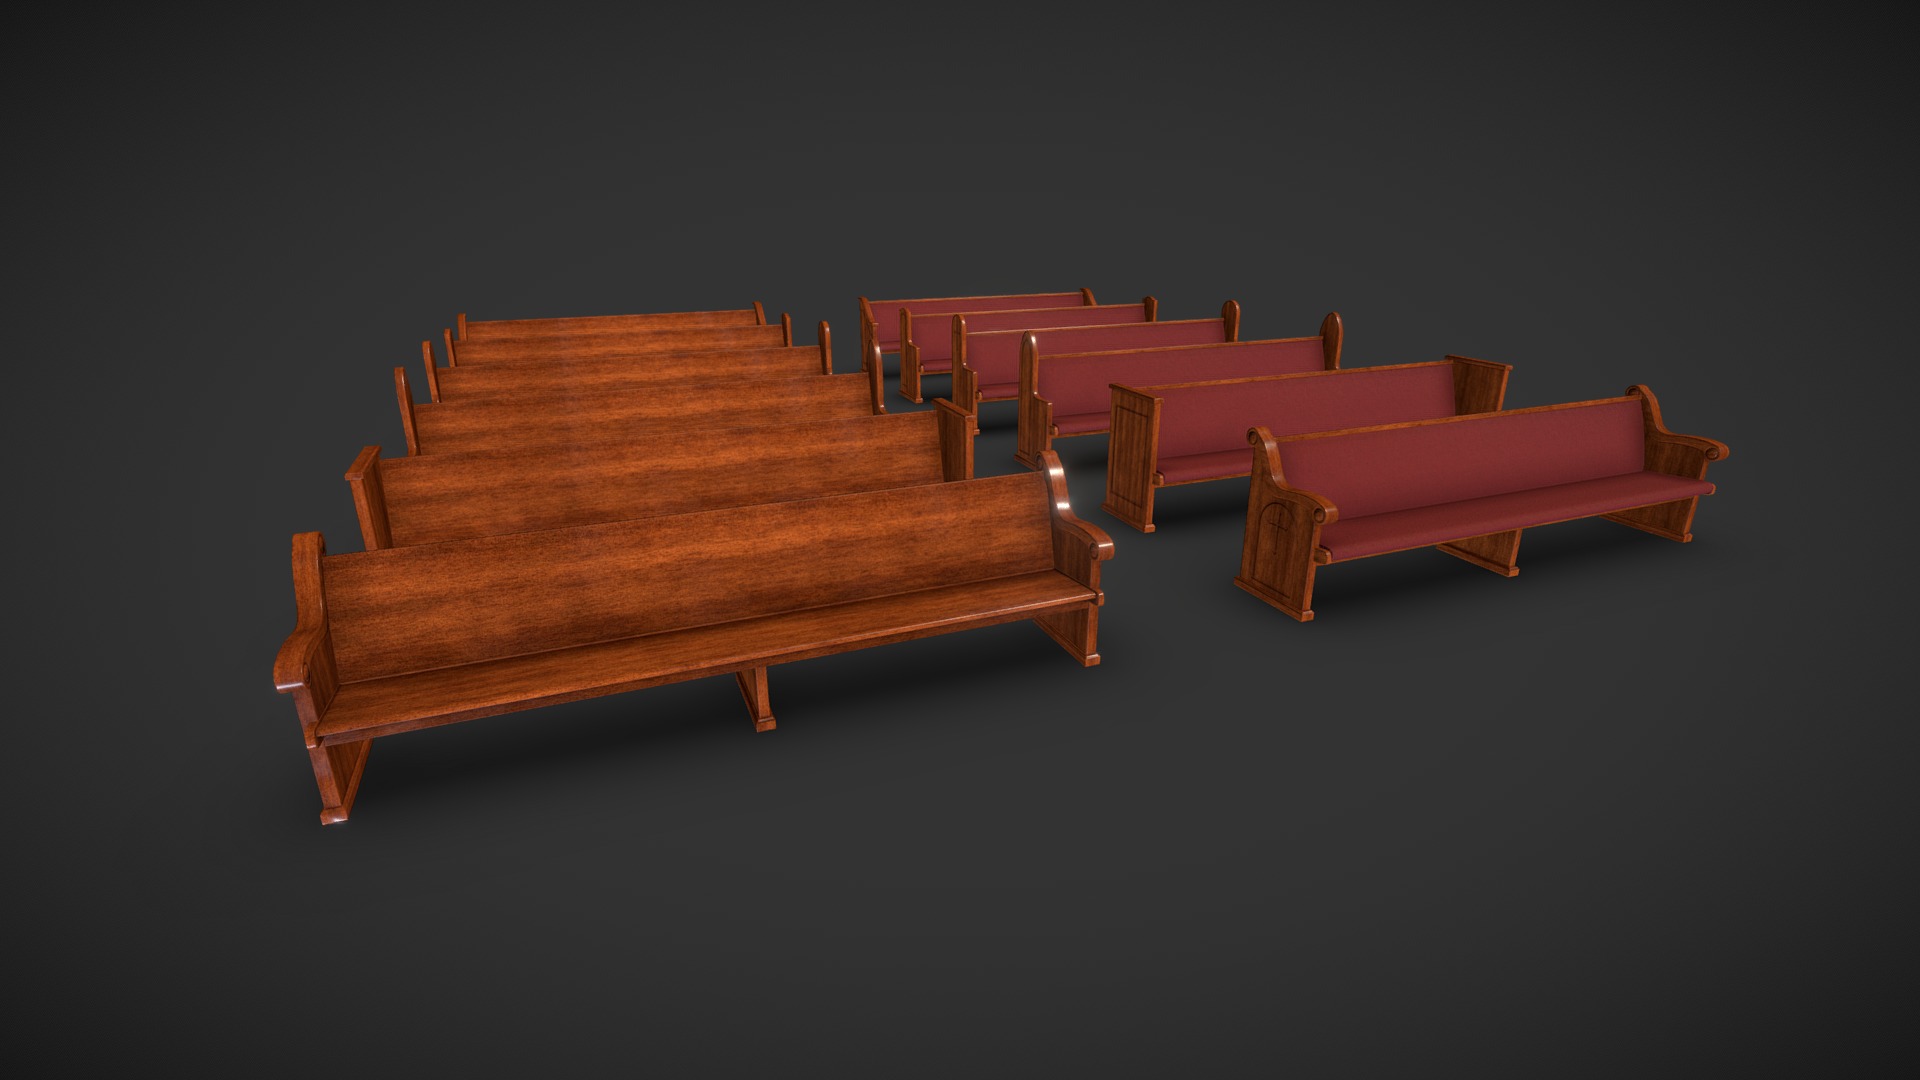 A lowpoly wooden pew set modeled in 3dsmax, textured using Substance Painter 2.

Between 283 and 850 quad lowpoly model in FBX and OBJ formats
Unwrapped UVs with no overlap (2 materials per bench)
High Quality PBR textures (4096 x 4096)
Diffuse Texture
DirectX Normals Texture
Individual Ambient Occlusion, Metallic and Roughness Textures - Wooden Church Pews - Buy Royalty Free 3D model by MikeLuxton 3d model